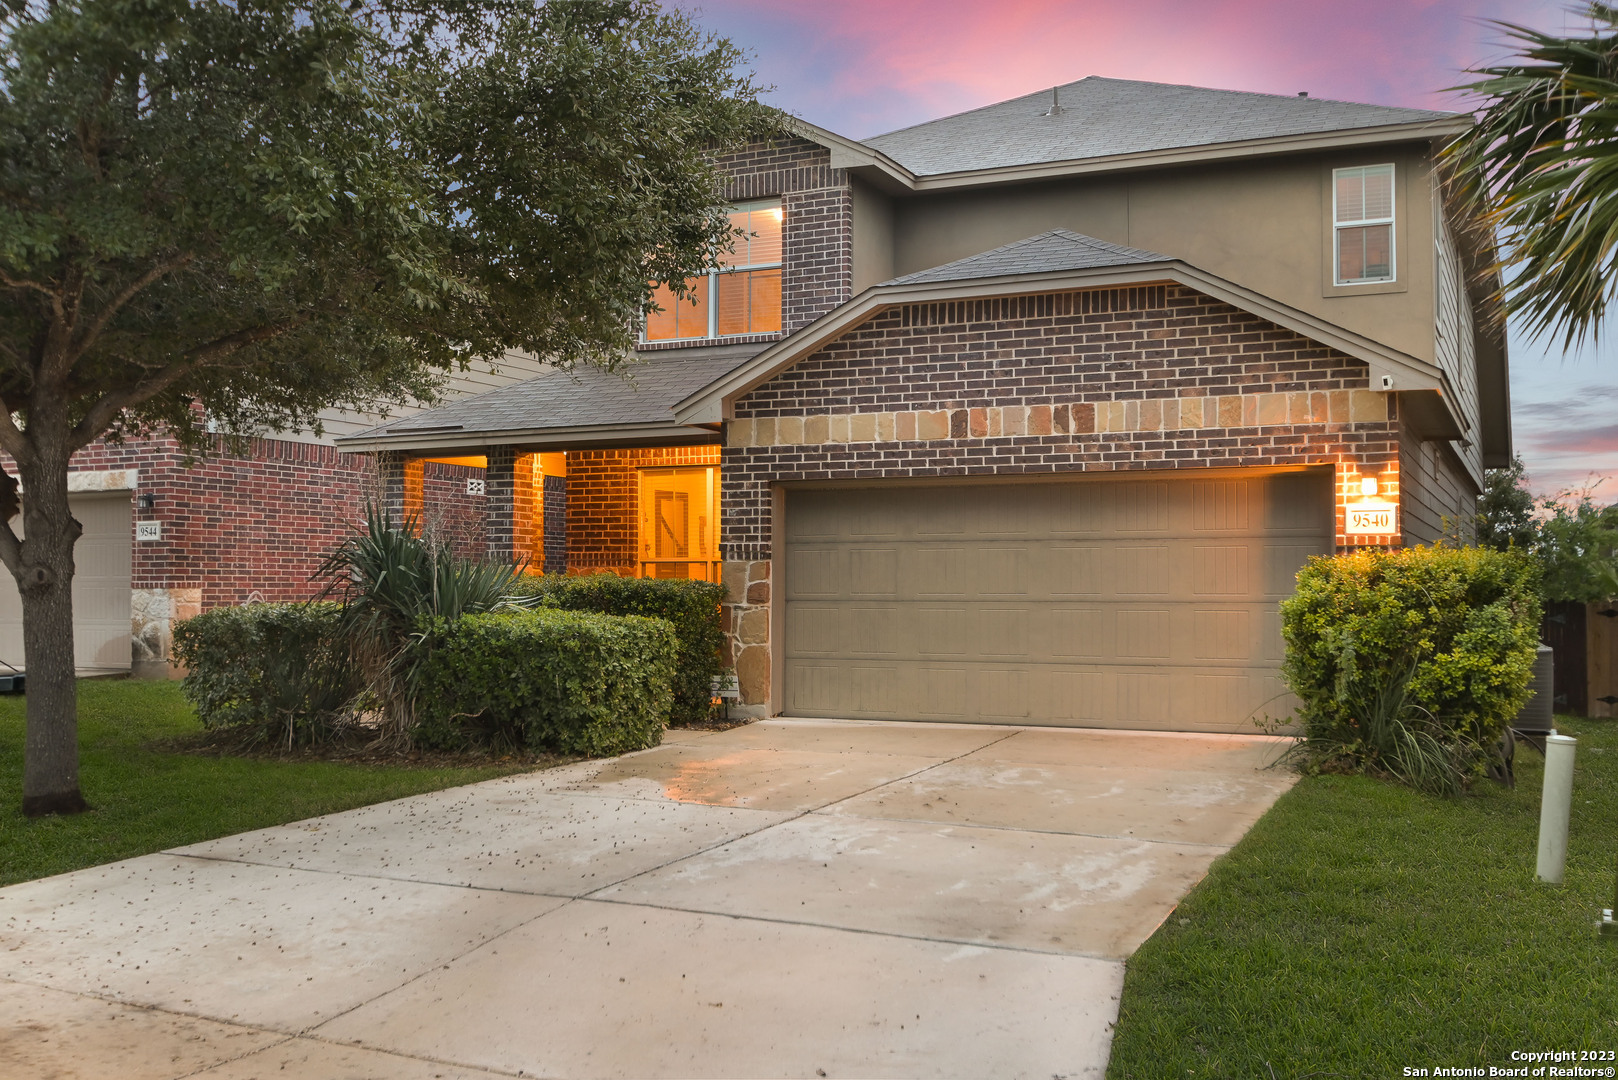 Photo of 9540 Gold Stage Rd in San Antonio, TX